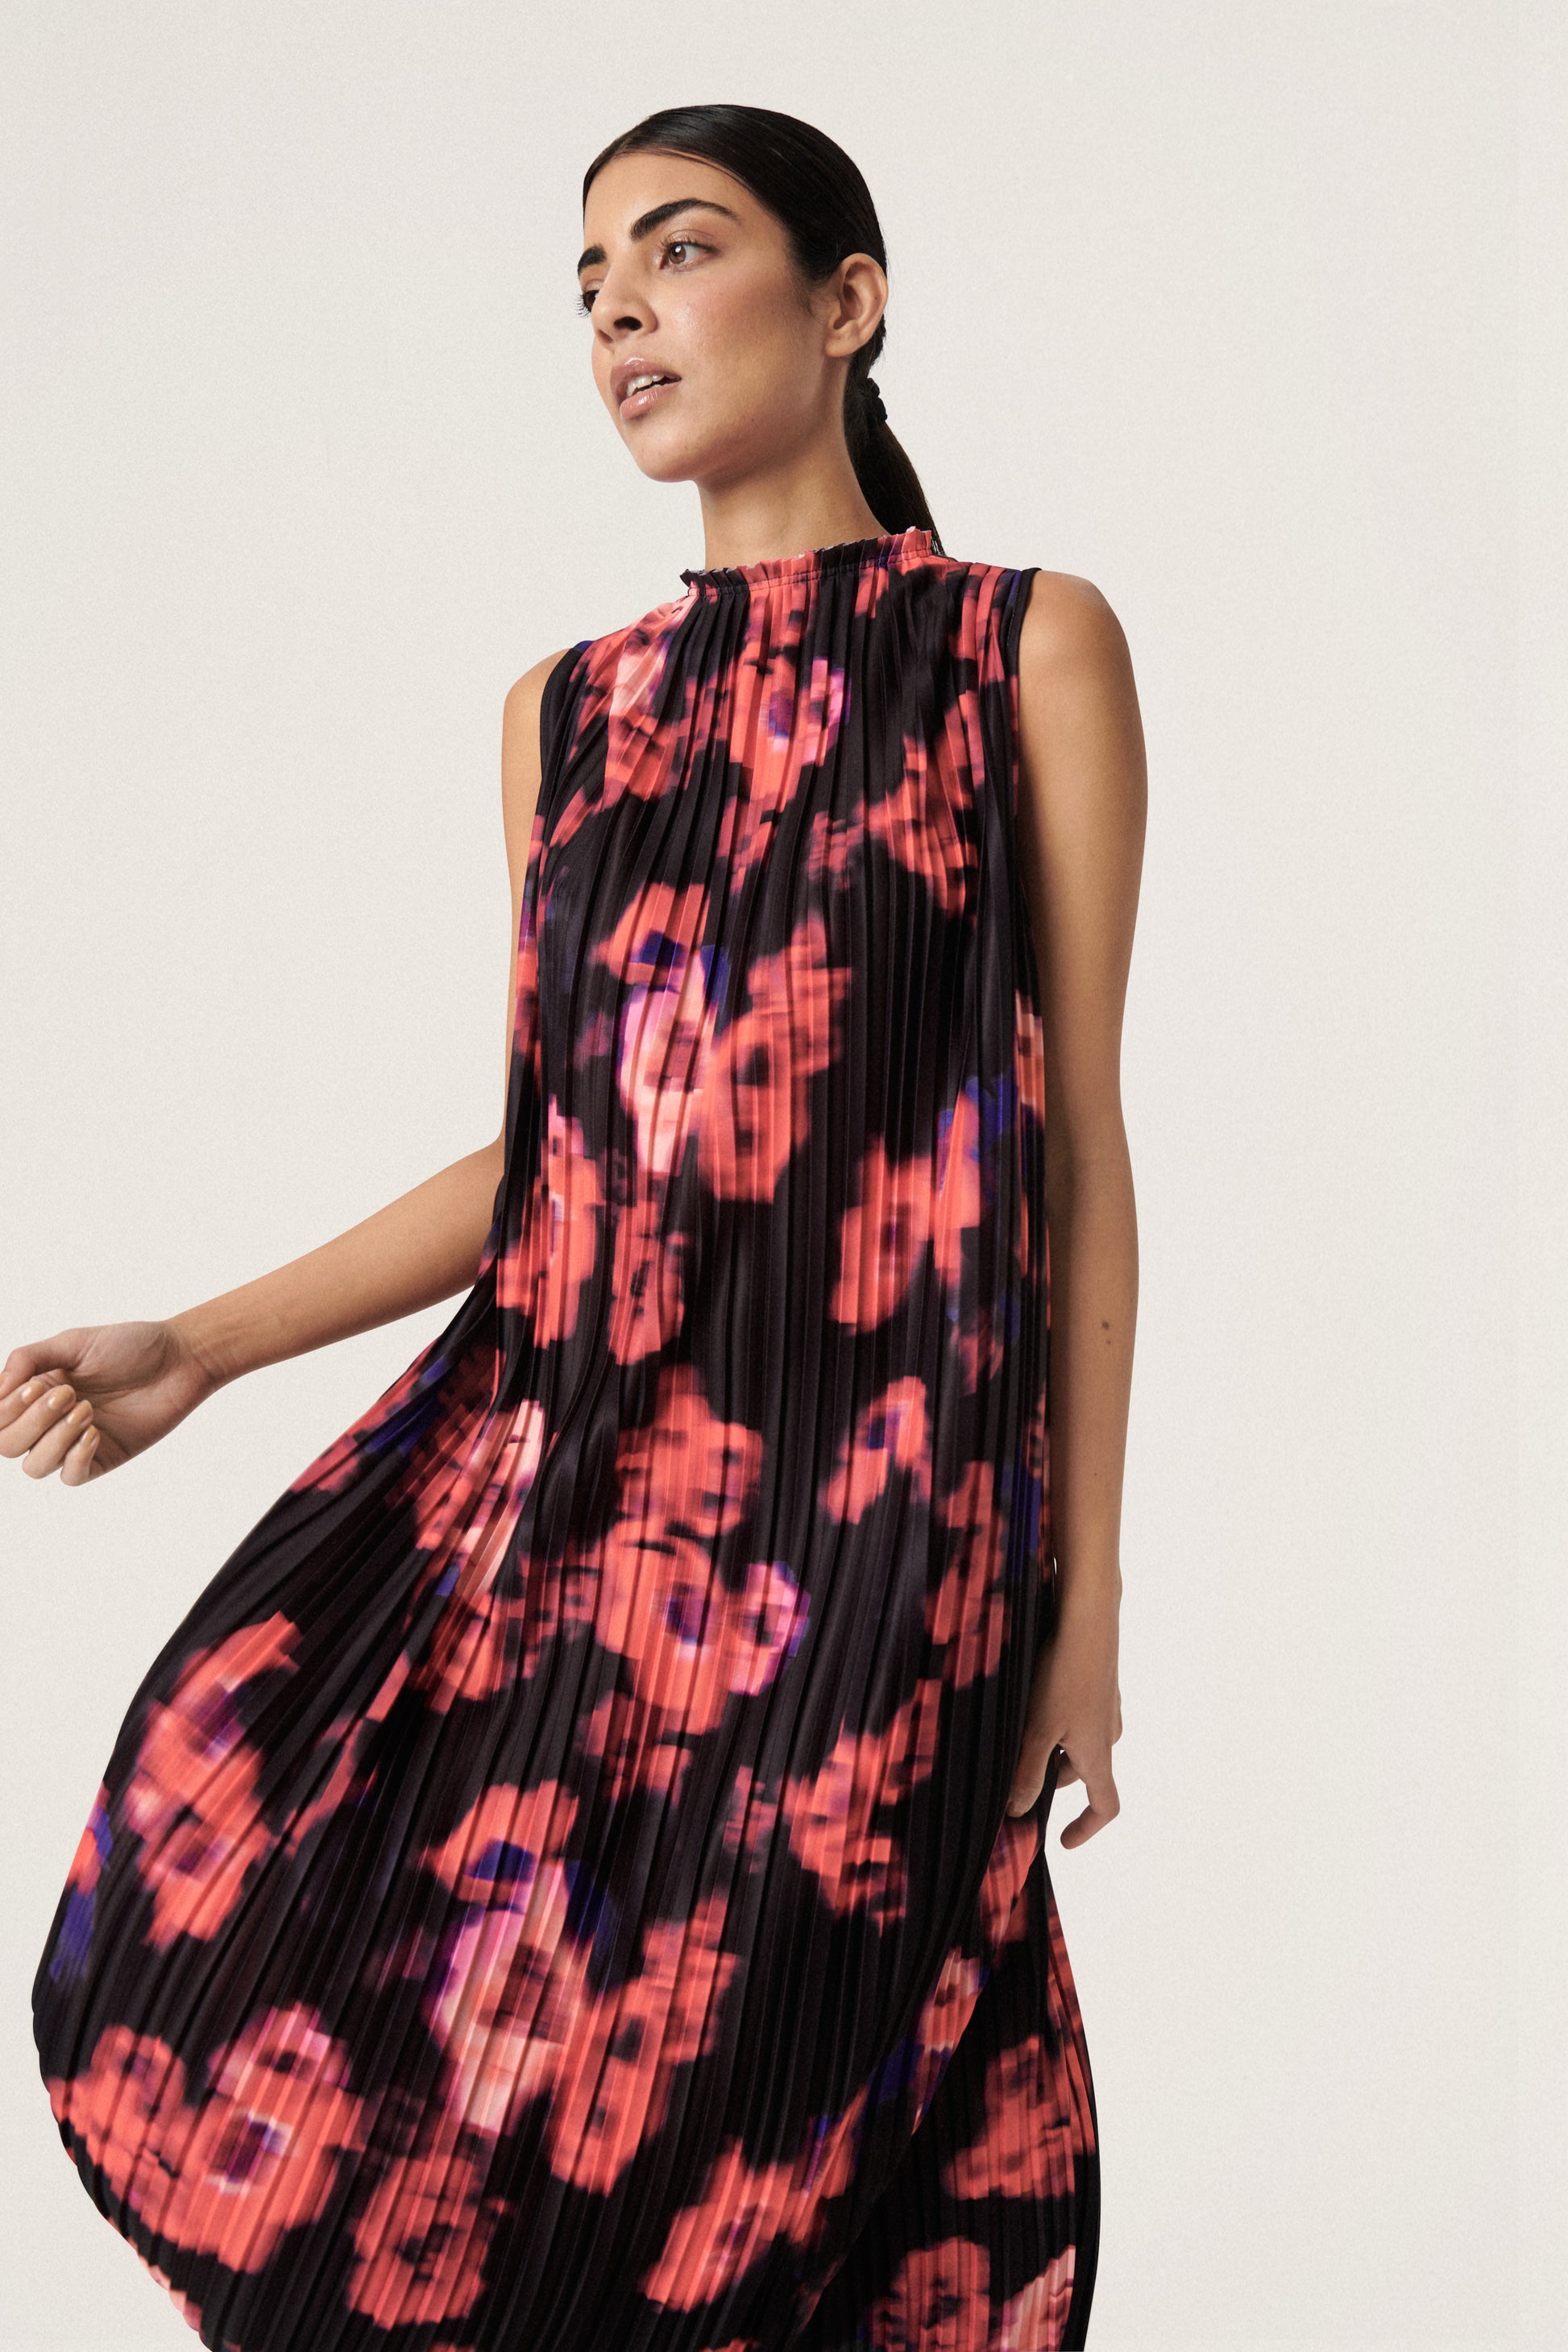 Soaked in Luxury Alice Dress Dresses Red Blurred Flower Print